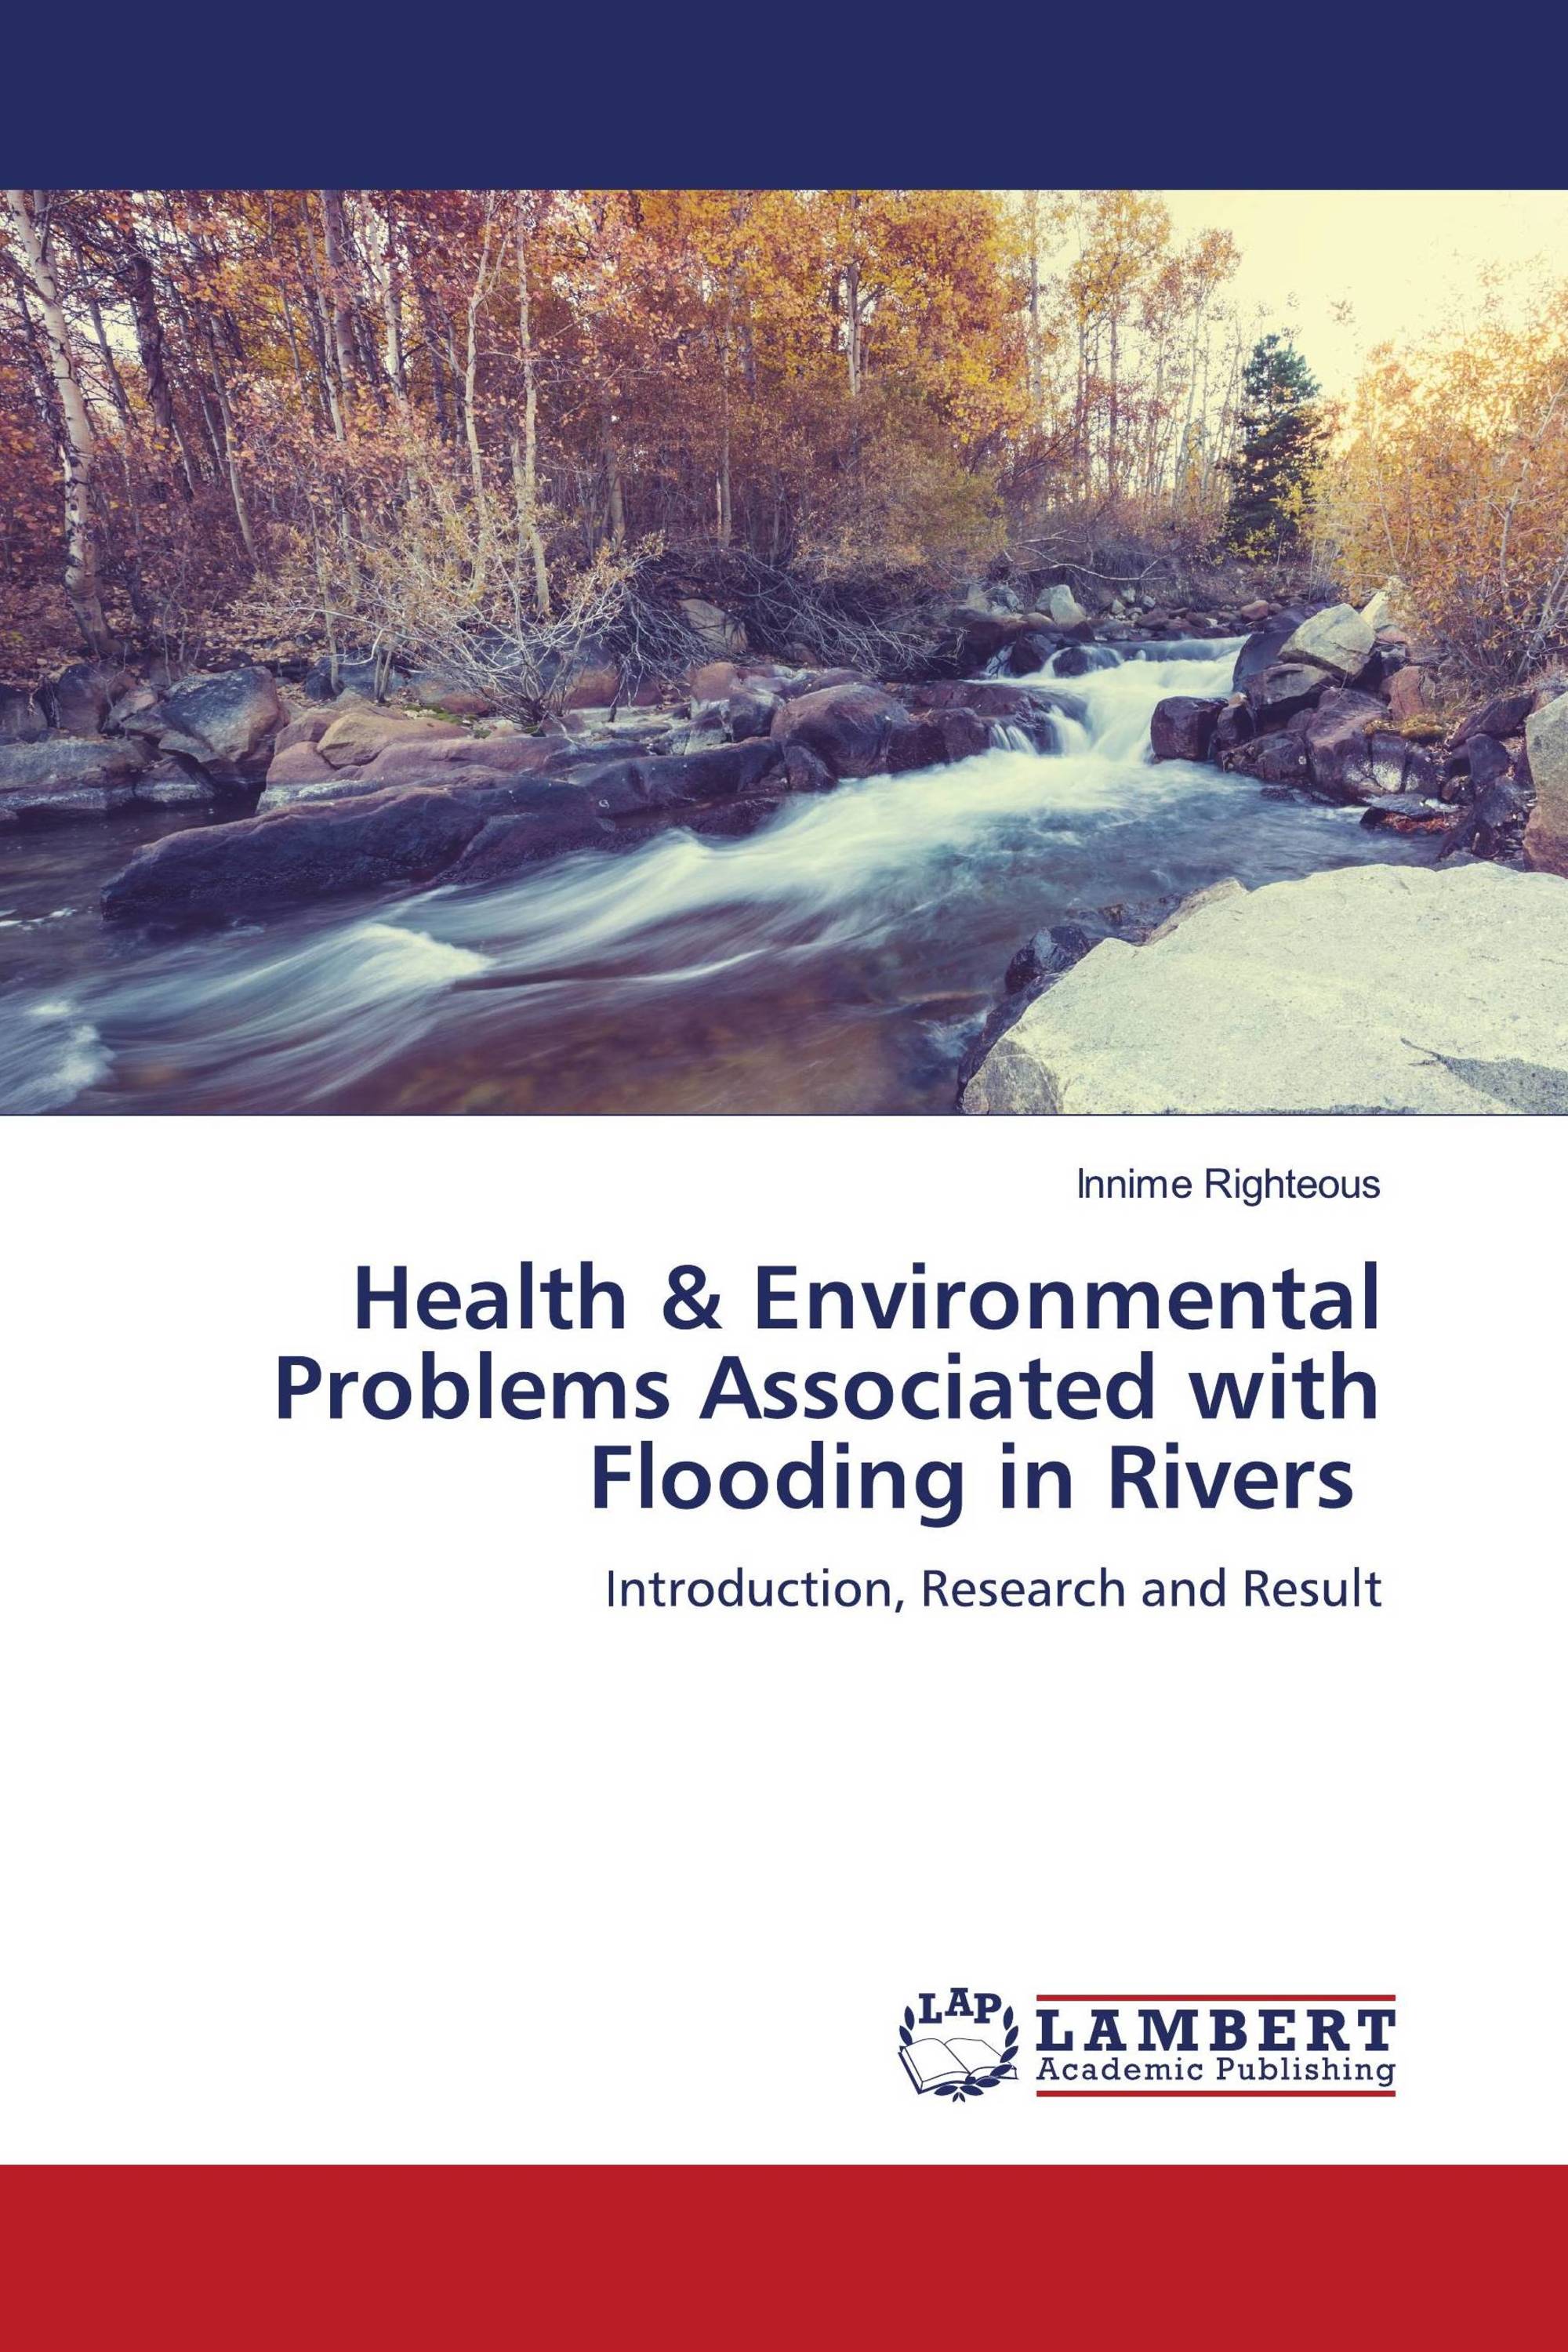 Health & Environmental Problems Associated with Flooding in Rivers